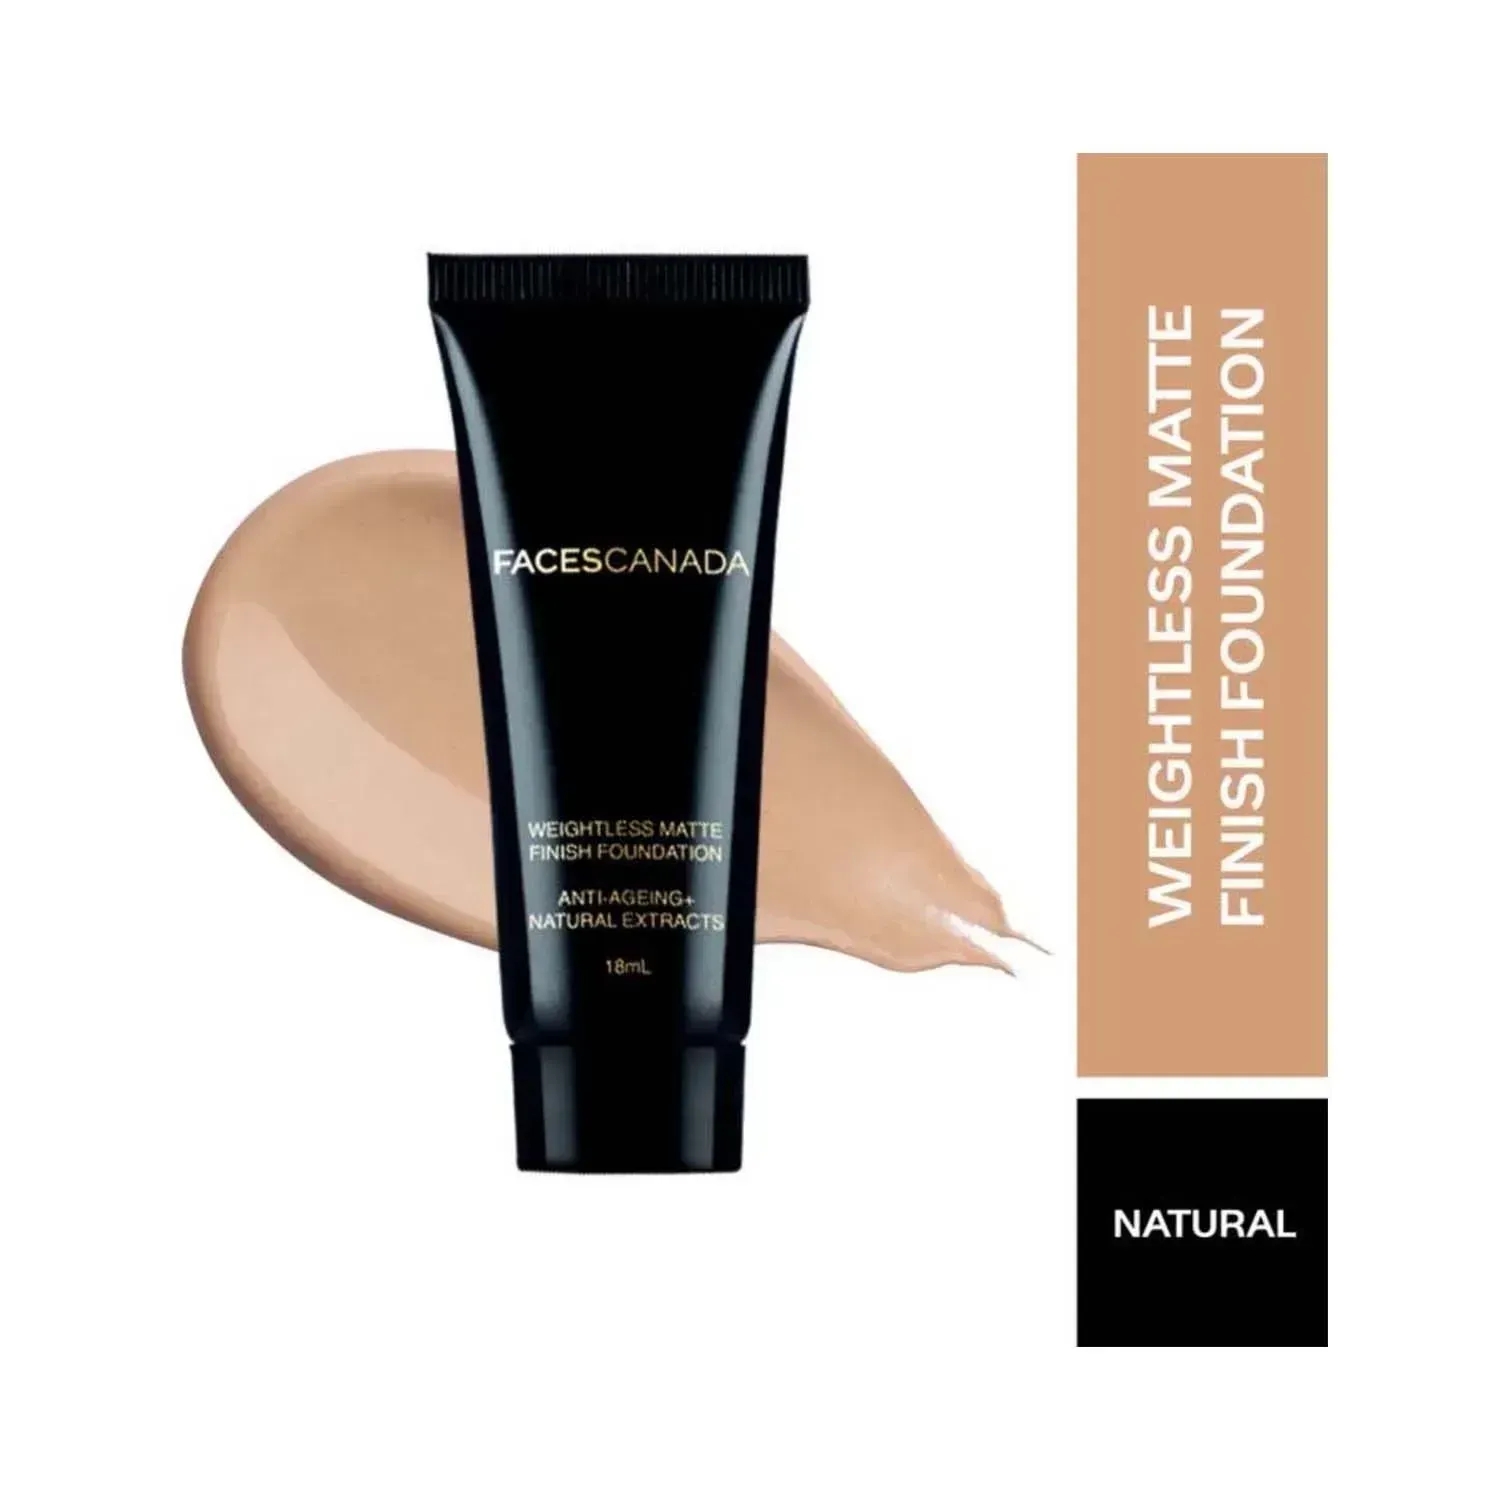 Faces Canada | Faces Canada Weightless Matte Finish Foundation - 02 Natural (18ml)